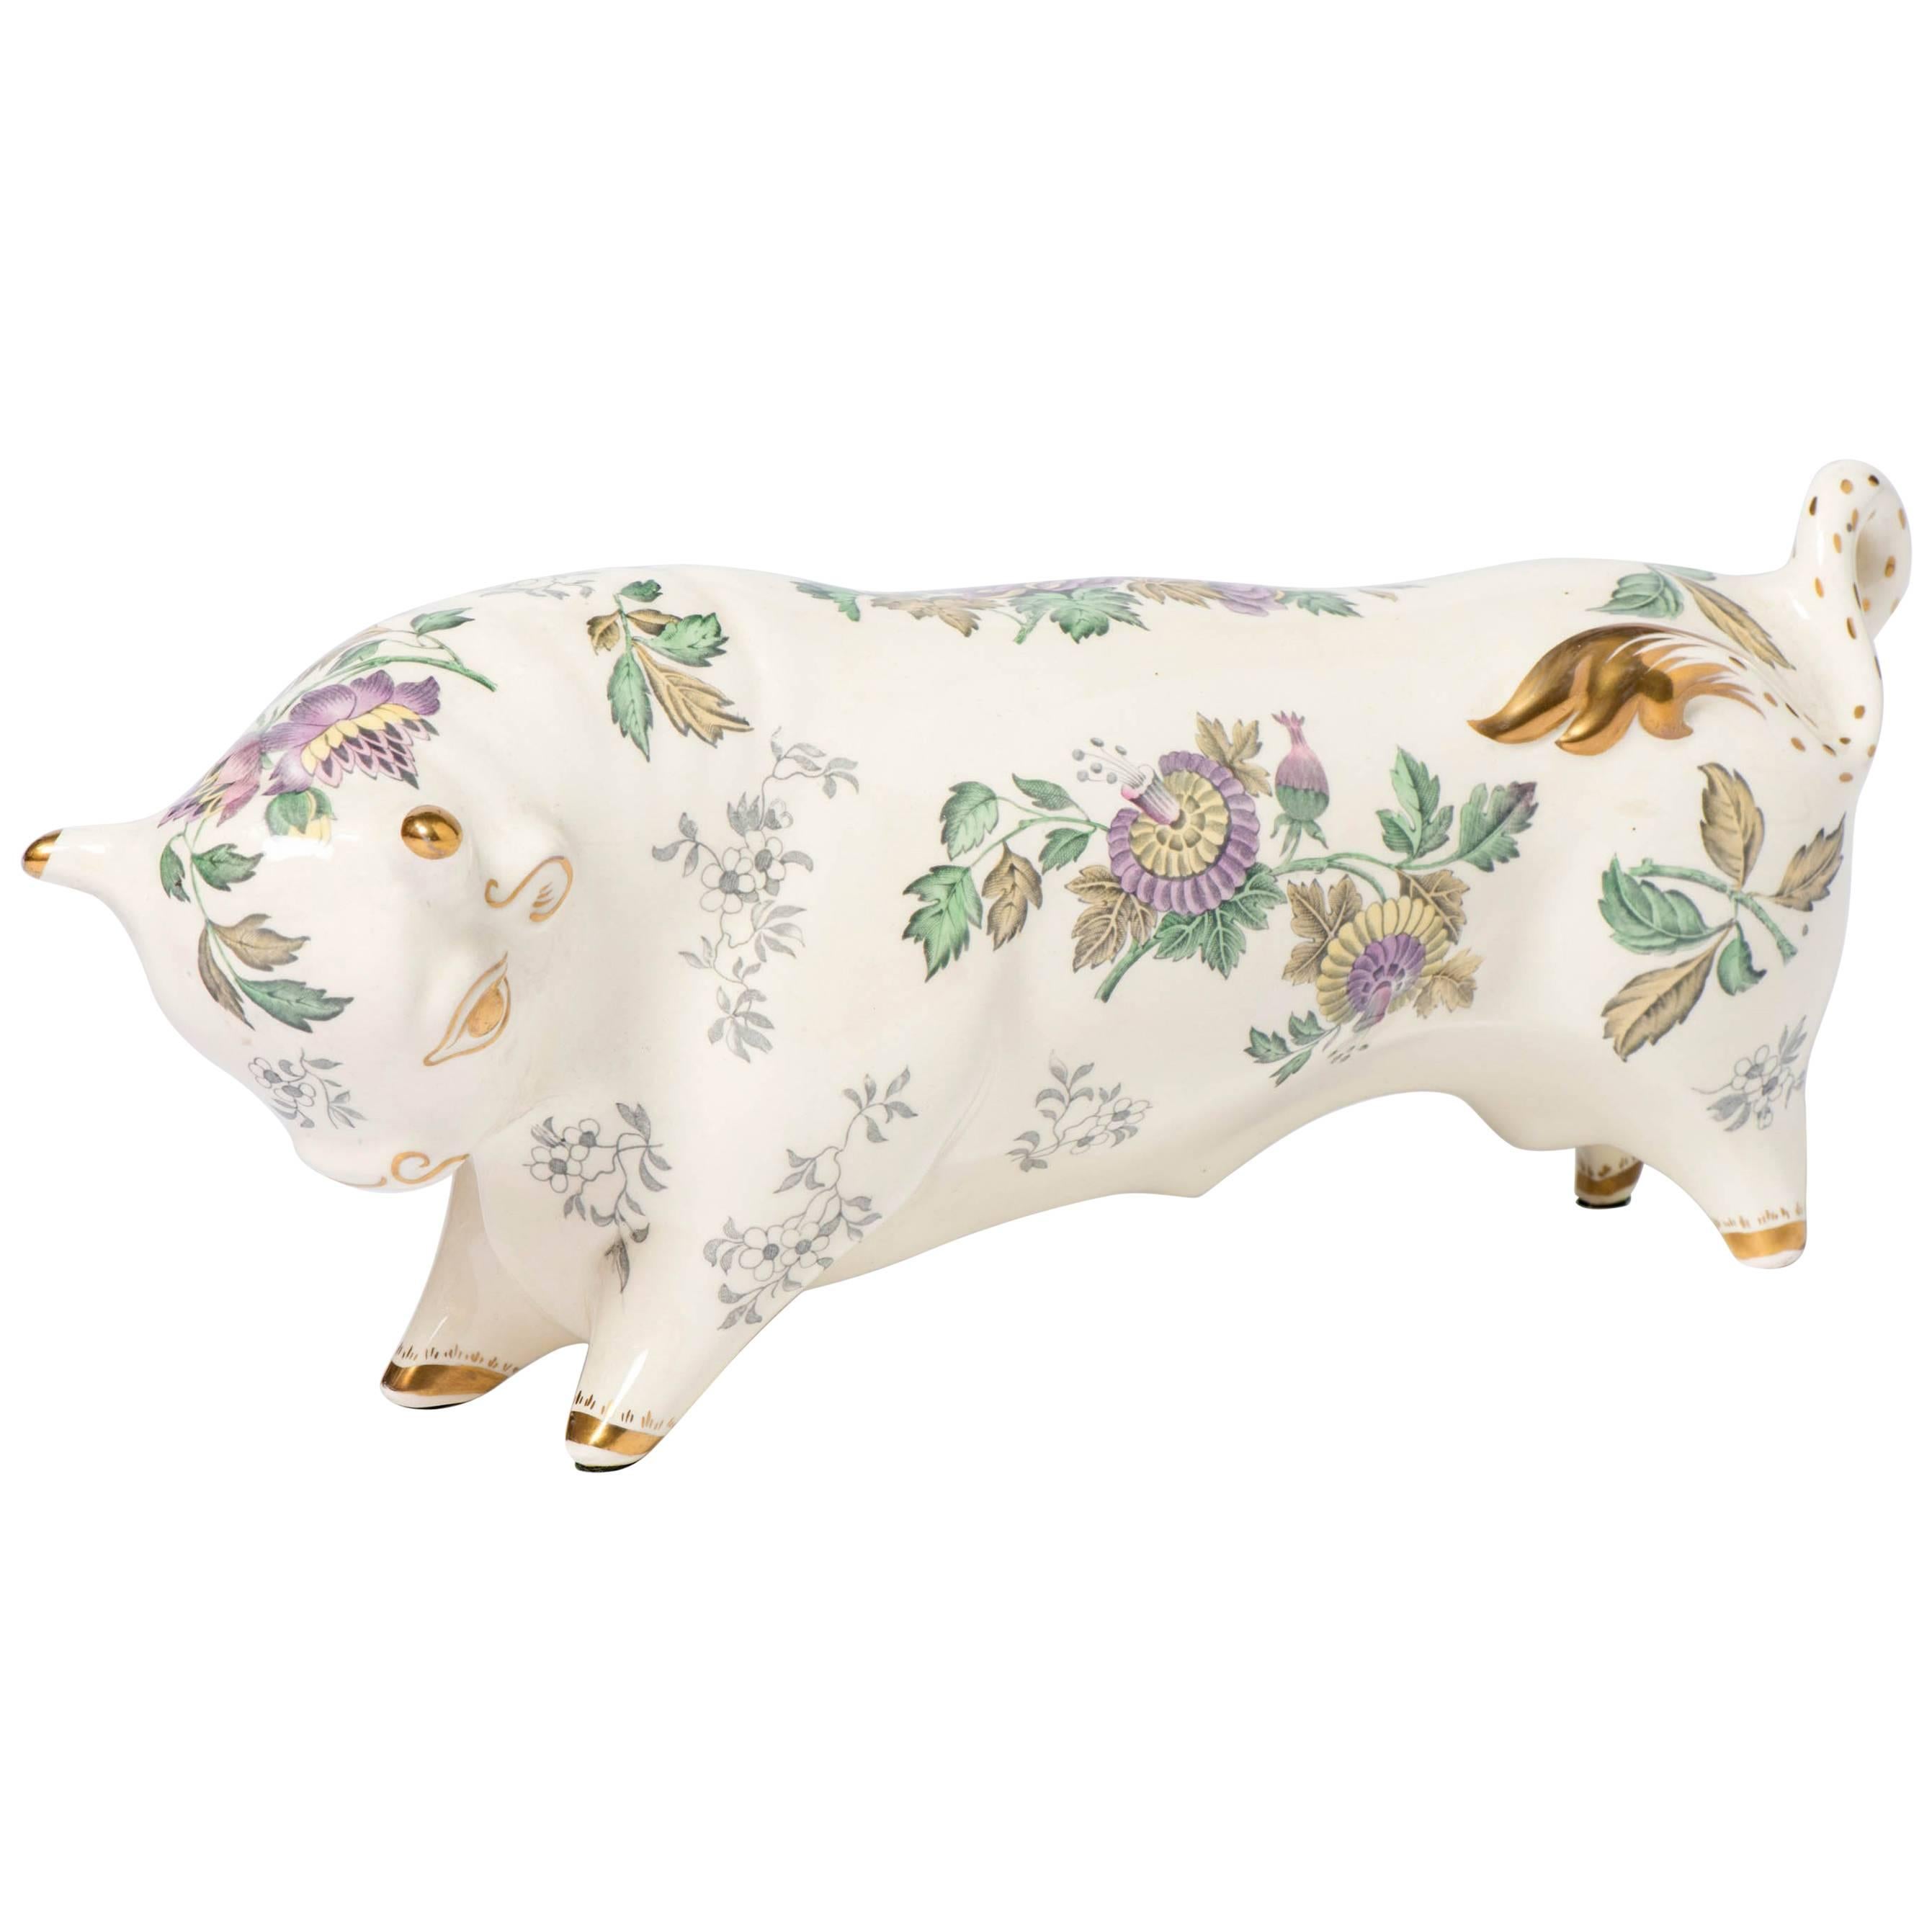 Arnold Nachin earthenware bull with flower decorations, England circa 1950